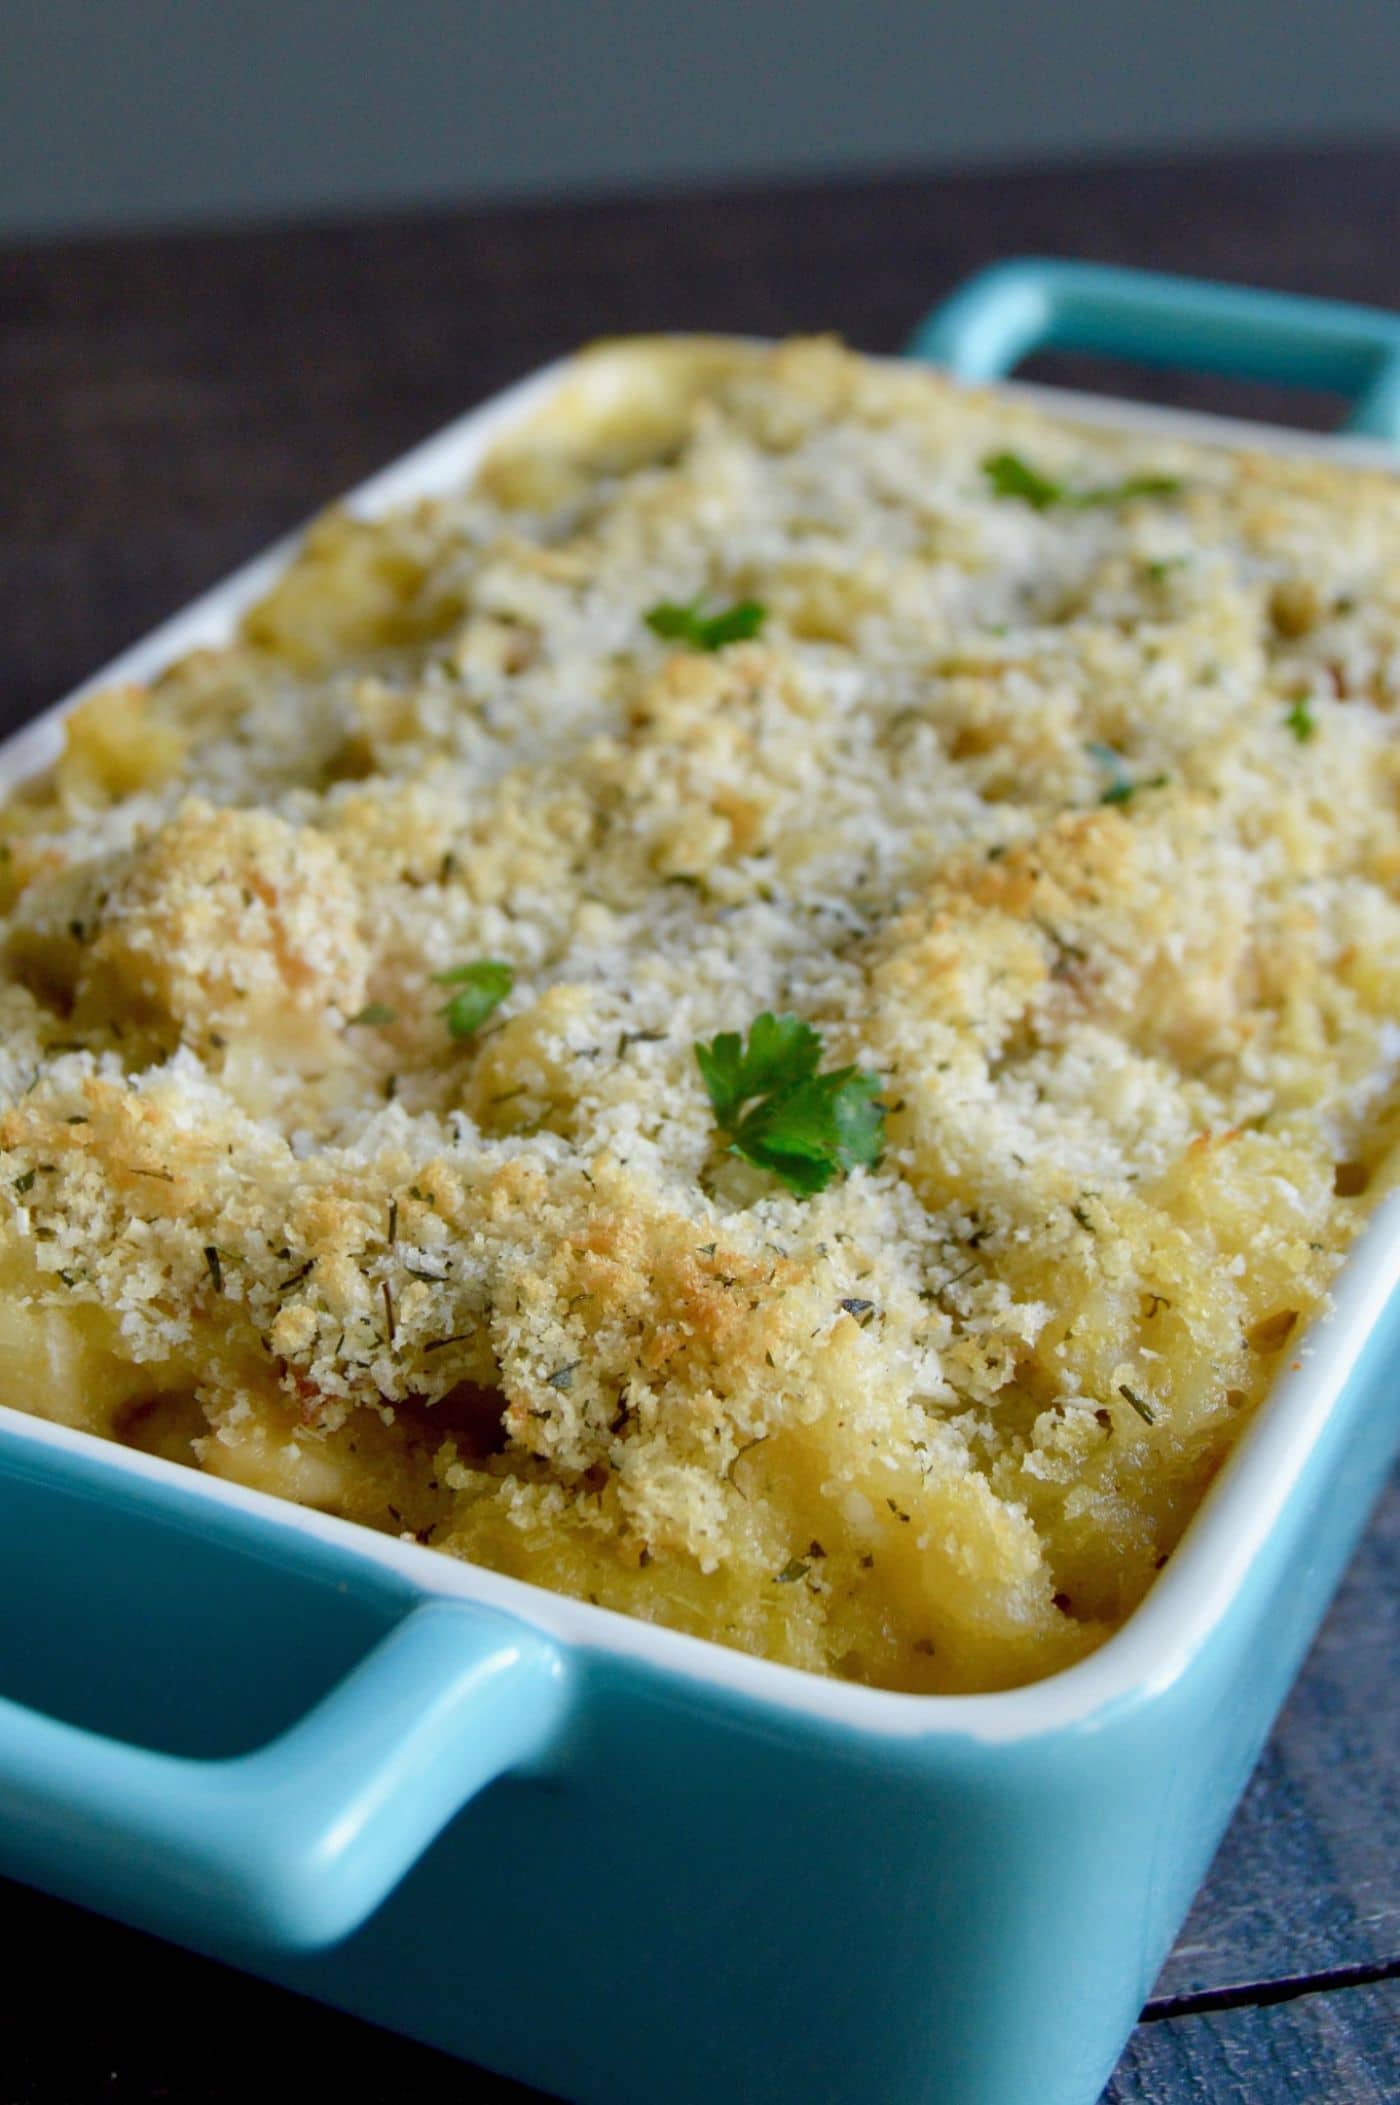 Cheesy Chicken Artichoke Casserole in a turquoise baking dish on a table